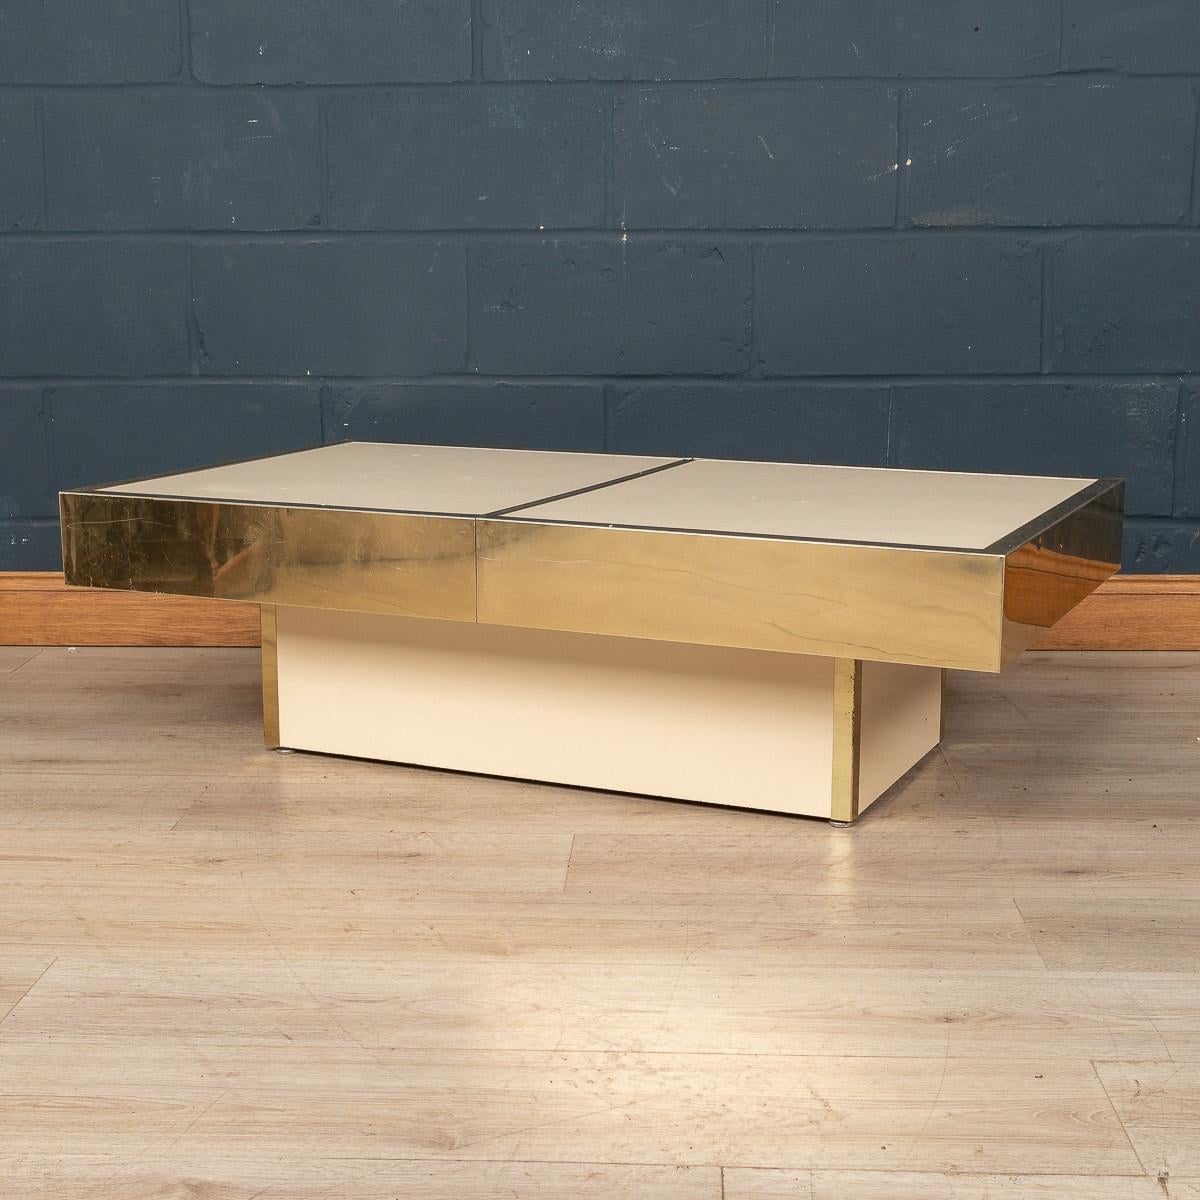 A beautiful “hidden bar” coffee table, made in Italy in the 1970s. This very well crafted coffee table is finished in cream melamine with a gilded metal blades. The top level slides apart in the middle to reveal a useful storage space for glasses